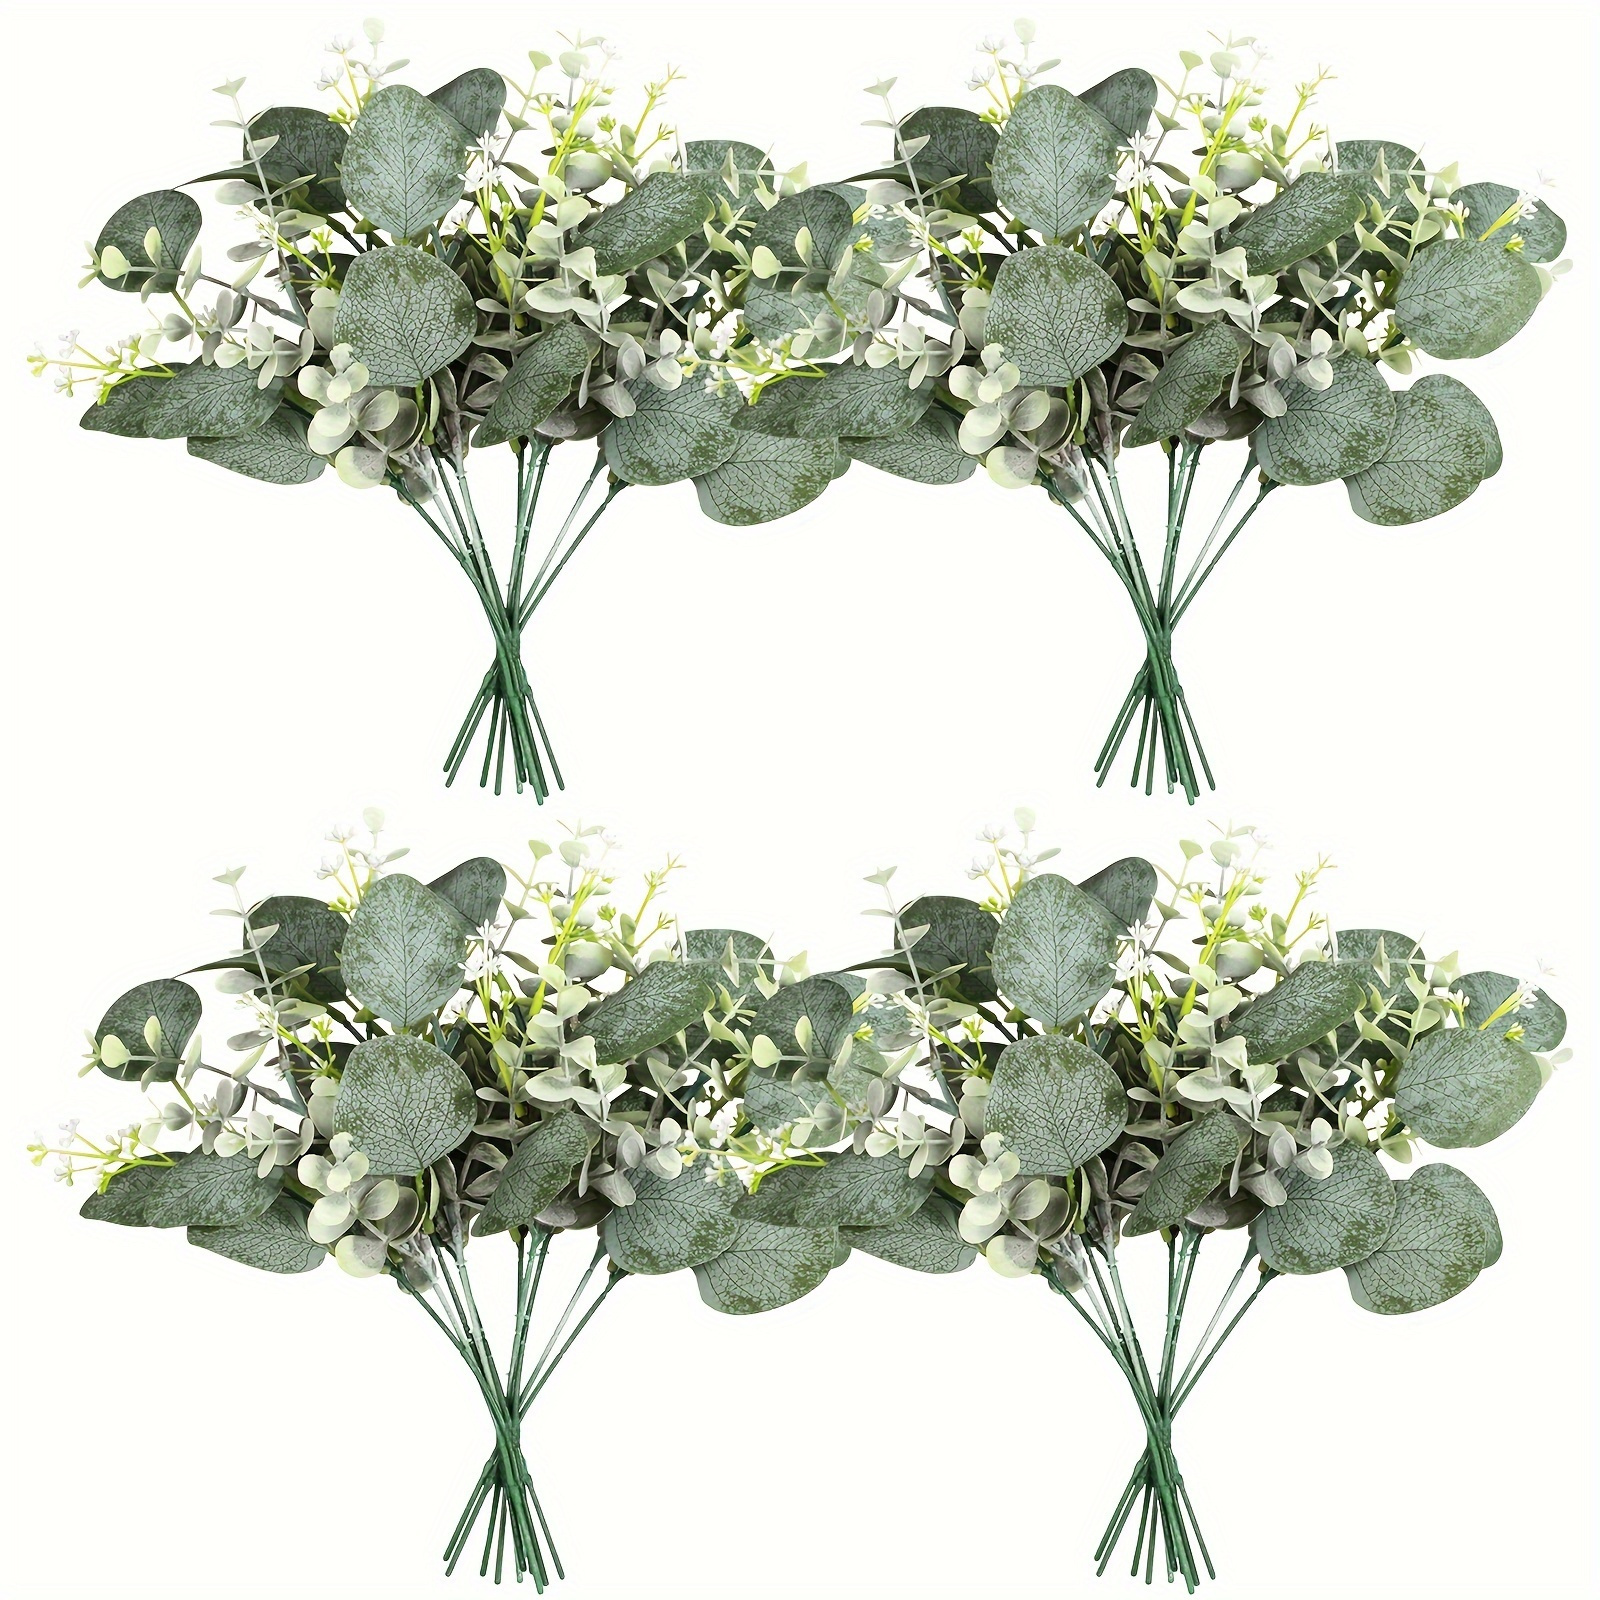 

20pcs, Mixed Eucalyptus Leaves Stems, Bulk Artificial Oval Eucalyptus Leaves With White Seeds Stems And Eucalyptus Leaves Sprays For Vase Floral Wreath Bouquets Wedding Greenery Decoration